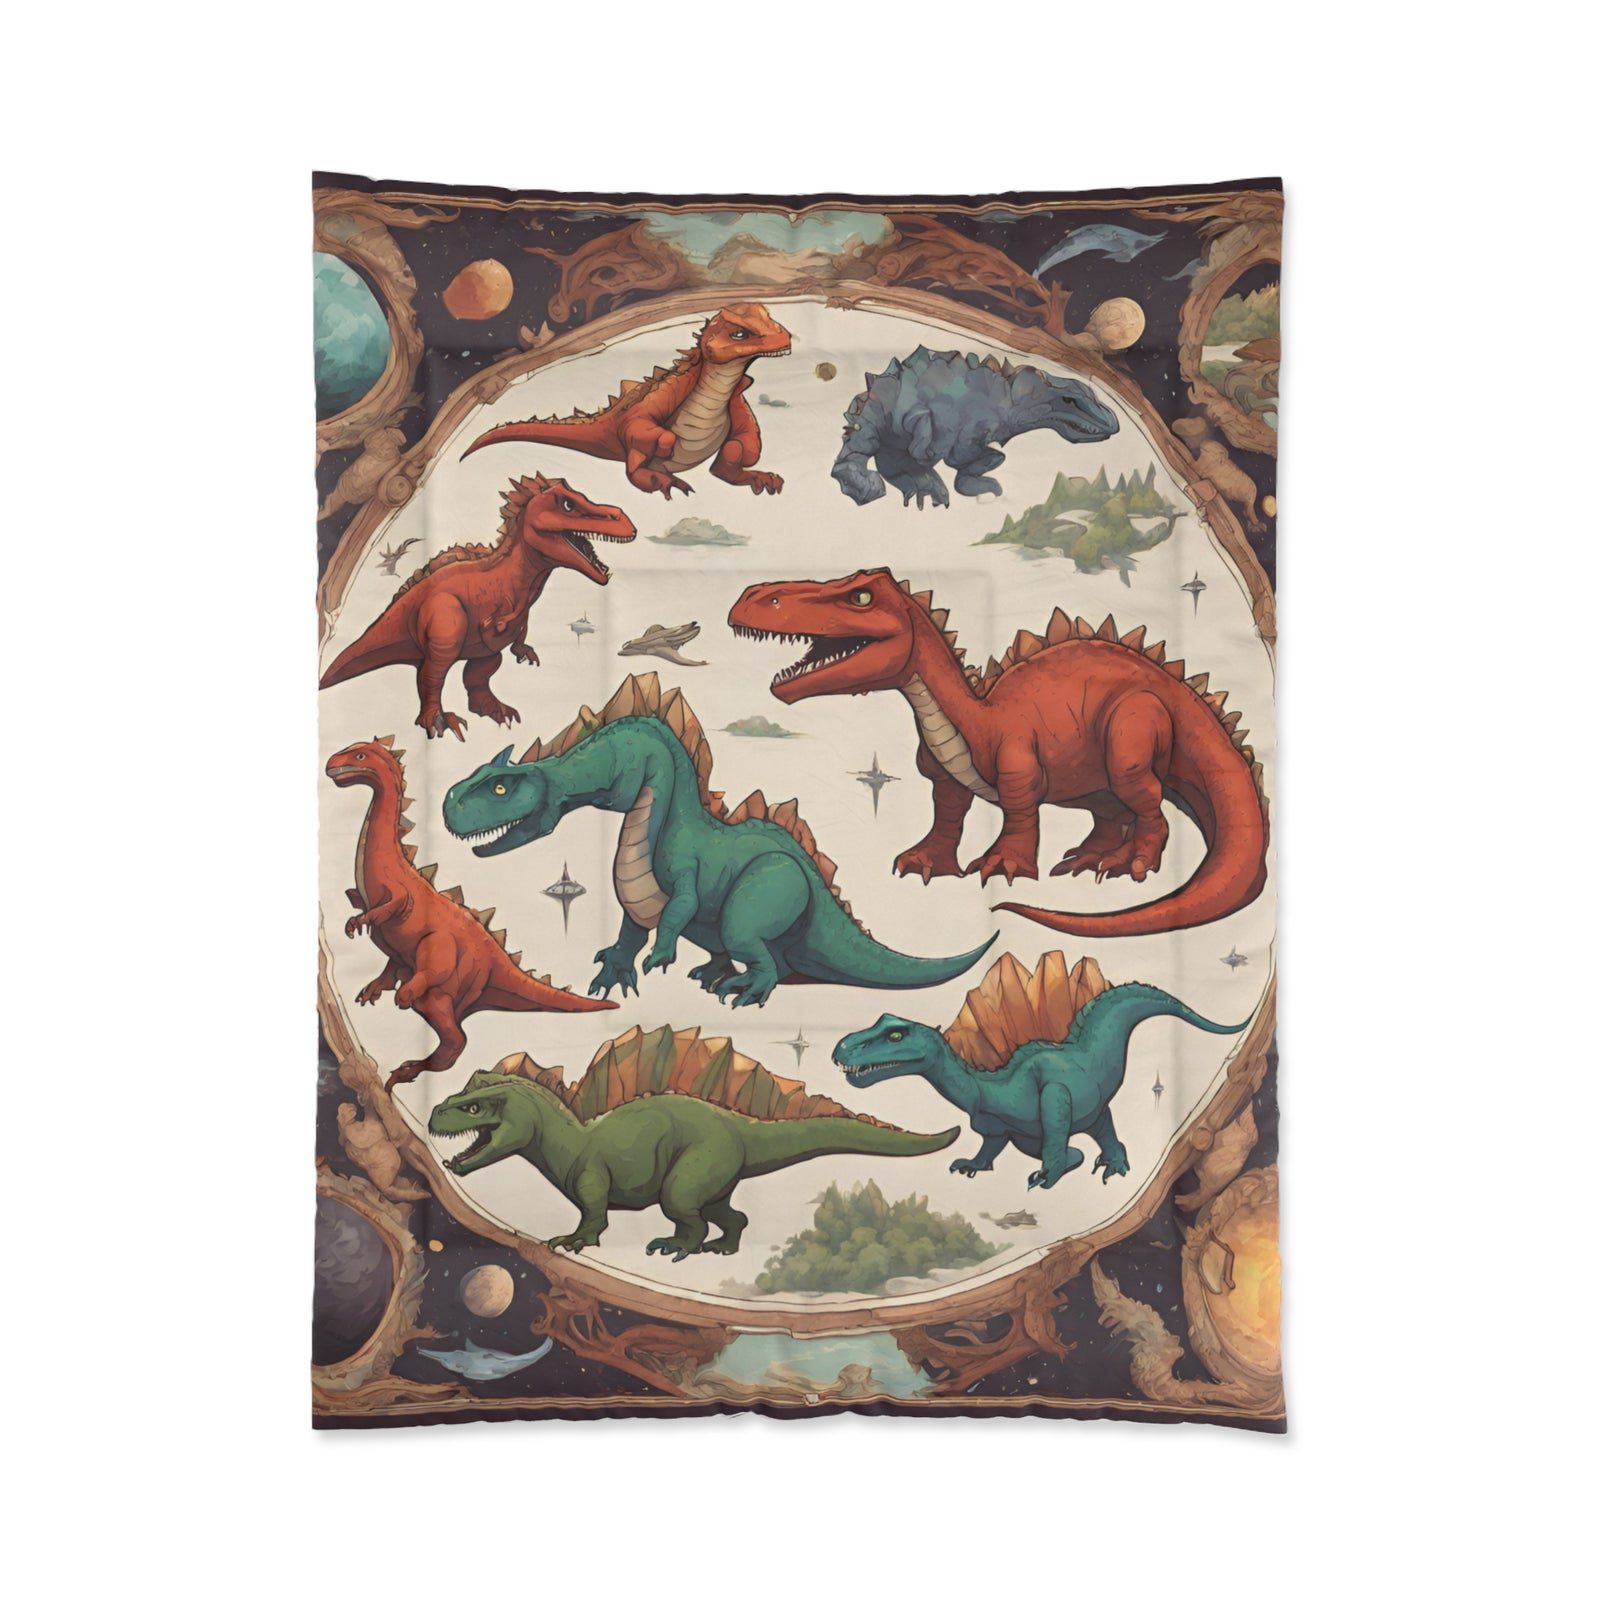 Dino Galactic Blaze: Explore the Cosmos with our Dinosaur Planets and Fire-themed Kids' Comforter - Ignite Imagination in the Bedroom!